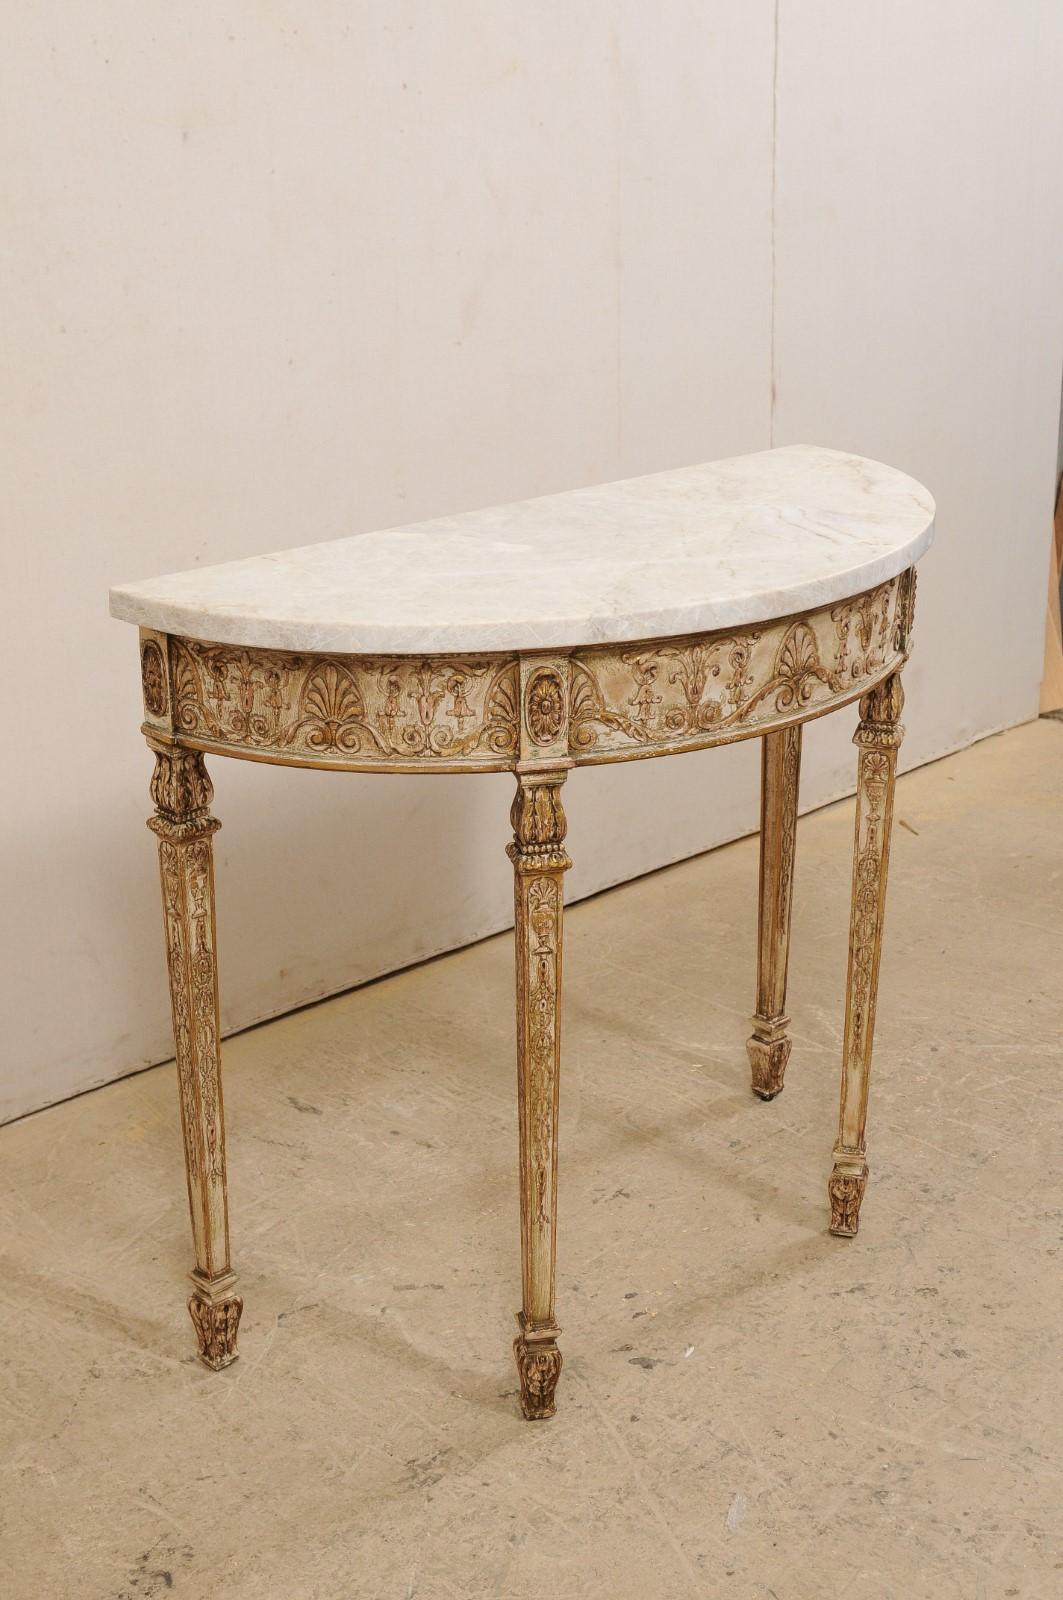 Hand-Carved Antique Italian-Style Demilune Table with Nicely Carved Accents & New Marble Top